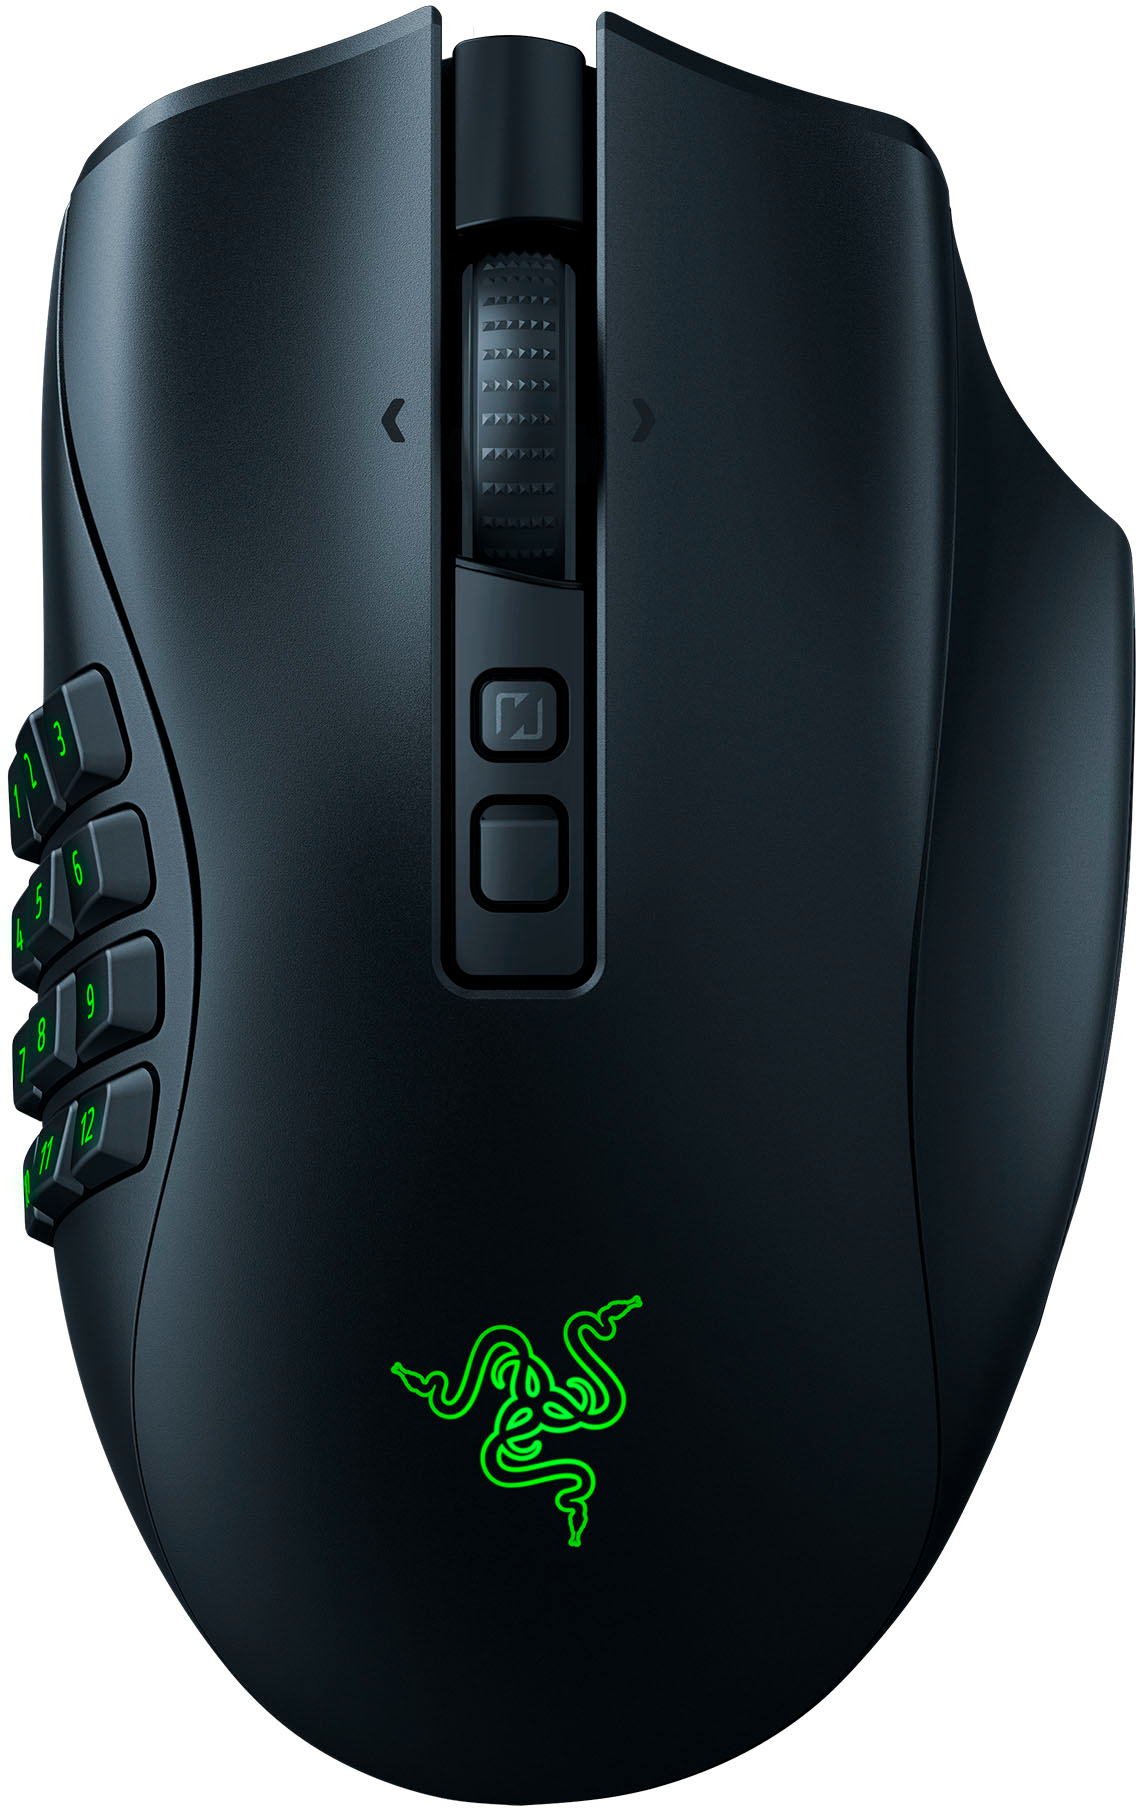 Razer Naga V2 Pro MMO Wireless Optical Gaming Mouse with Interchangeable  Side Plates in 2, 6, 12 Button Configurations Black RZ01-04400100-R3U1 -  Best